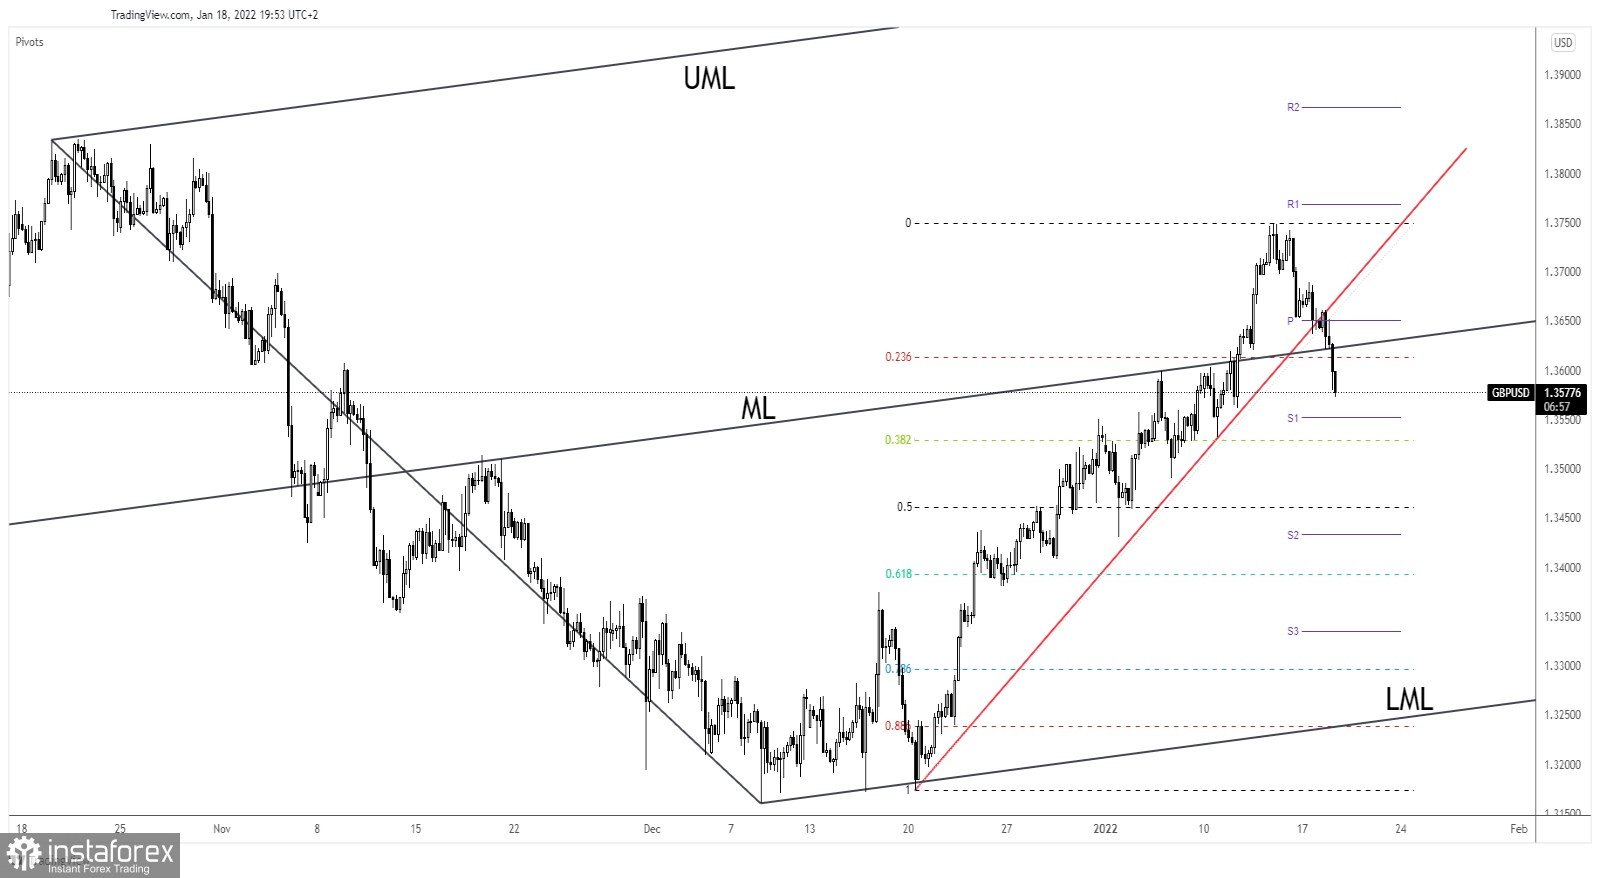 GBP/USD corrective phase activated